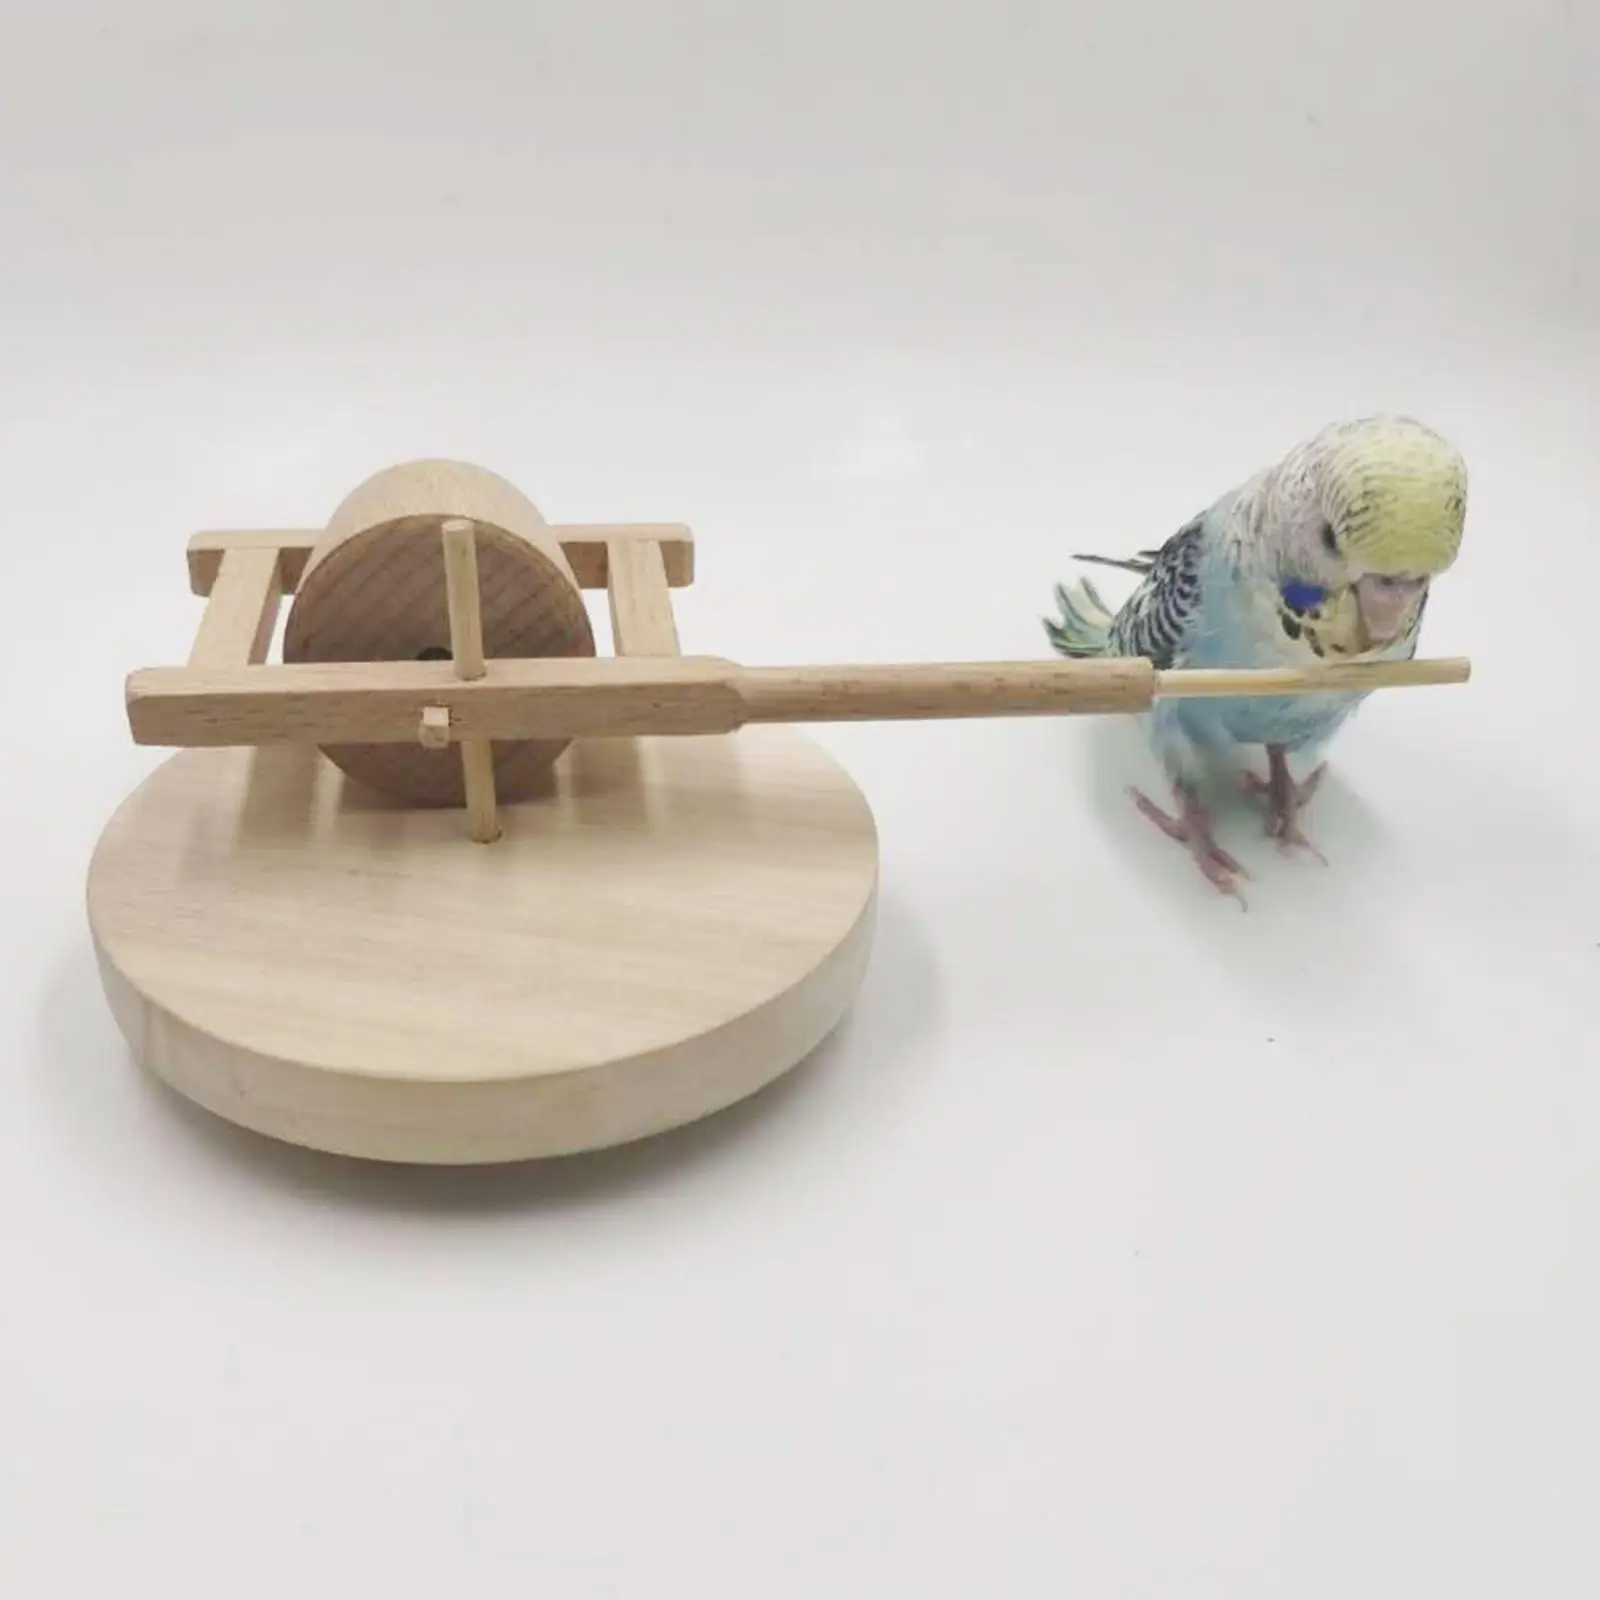 Parrot Stone Mill Toy Wood Learning Enrichment Toy Pet Supplies Cockatoo Quaker Macaw Intelligence Toy for Small Medium Birds